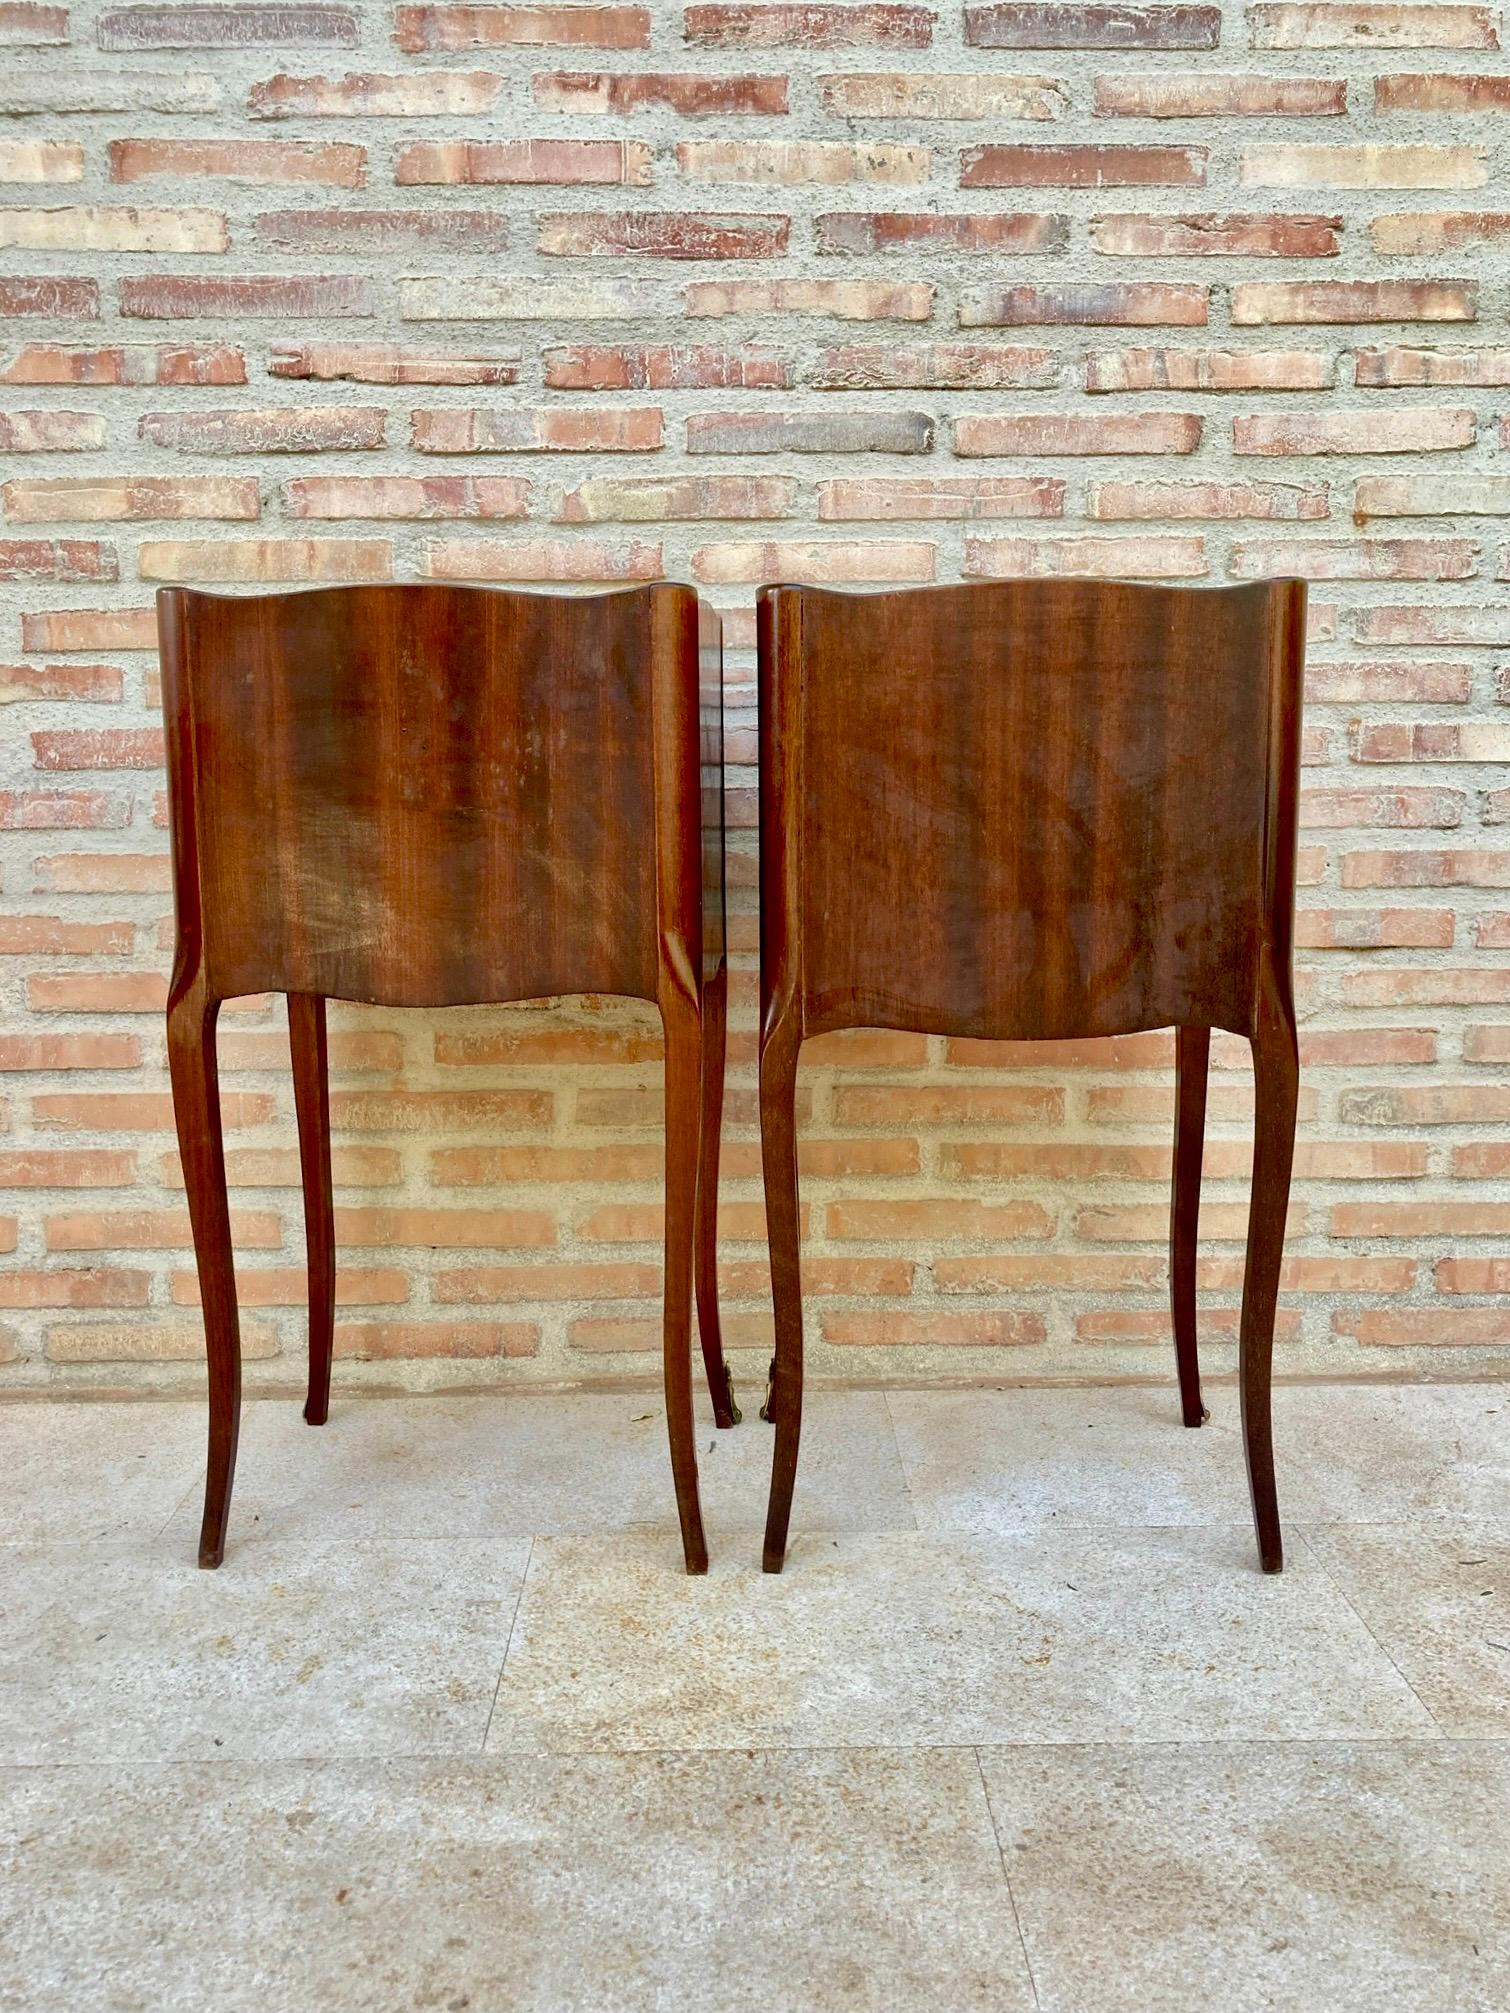 French Provincial Early 20th Century French Bedside Tables or Nightstands in Marquetry and Bronze